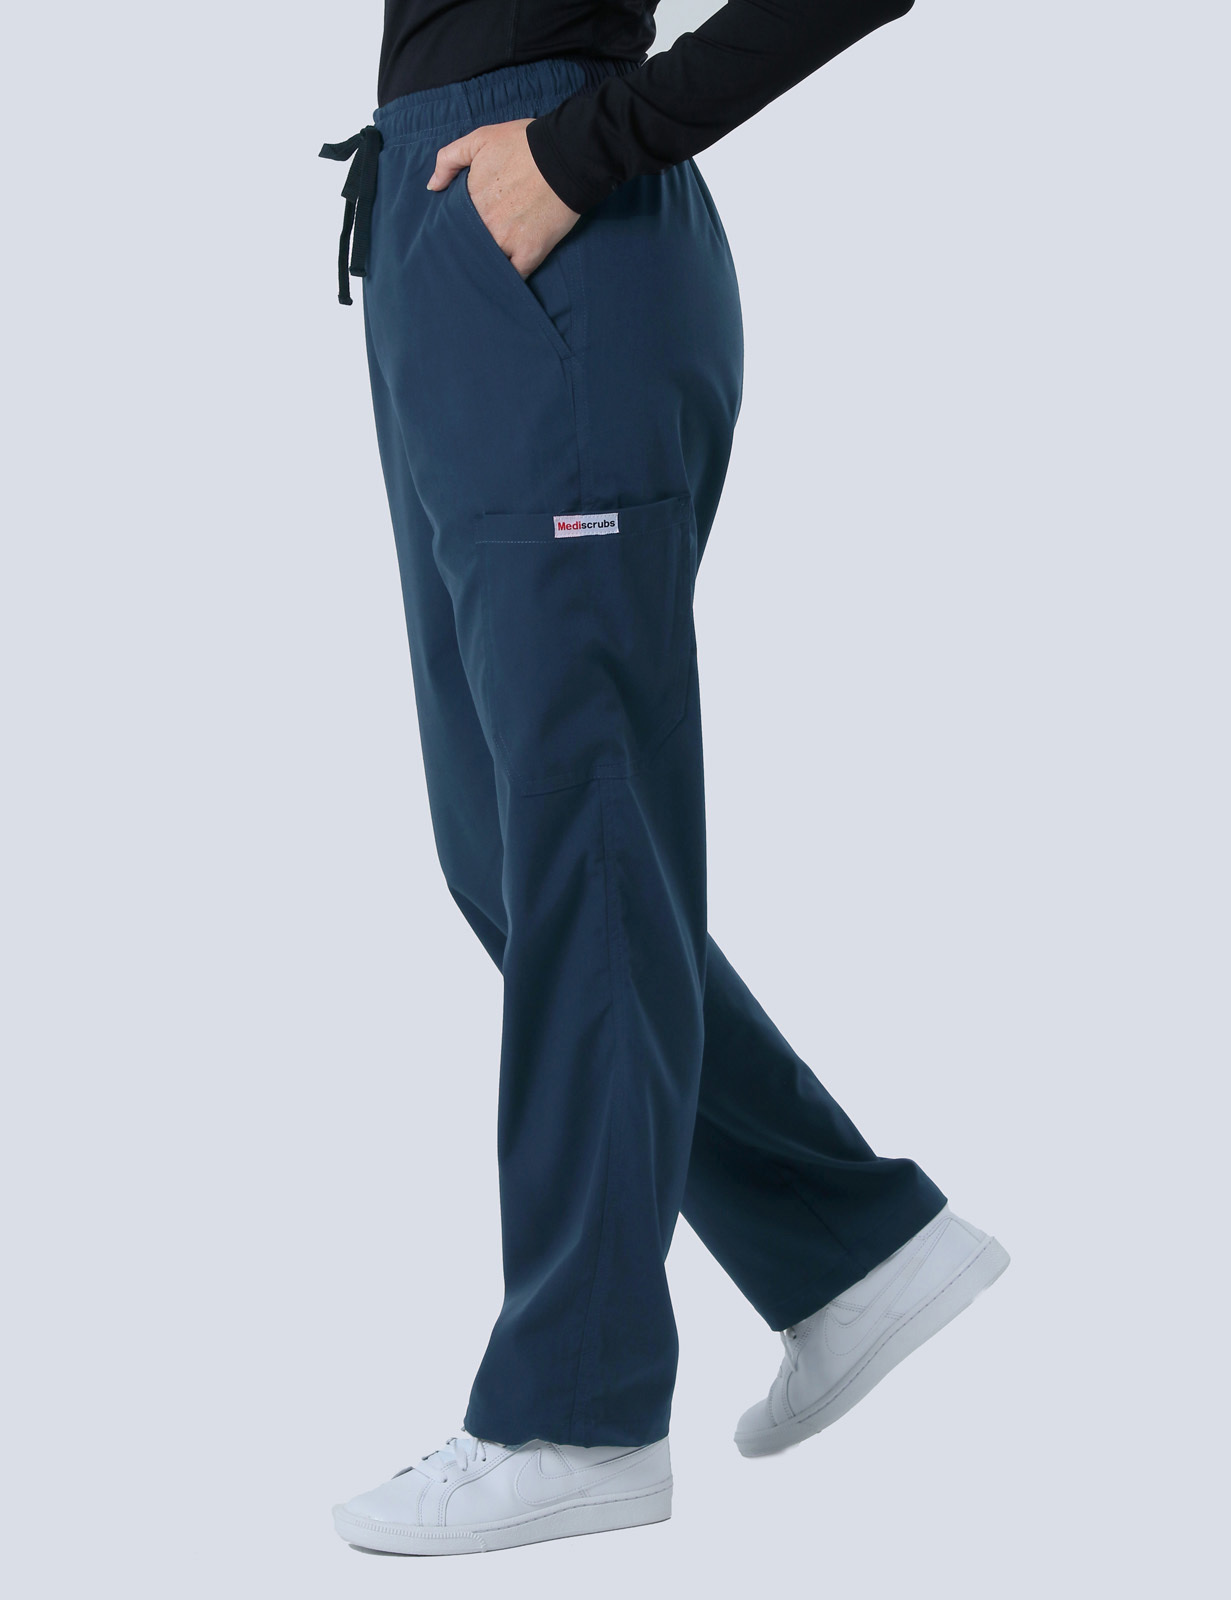 Redcliffe Hospital - ICU (Women's Fit Solid Scrub Top and Cargo Pants in Navy incl Logos)